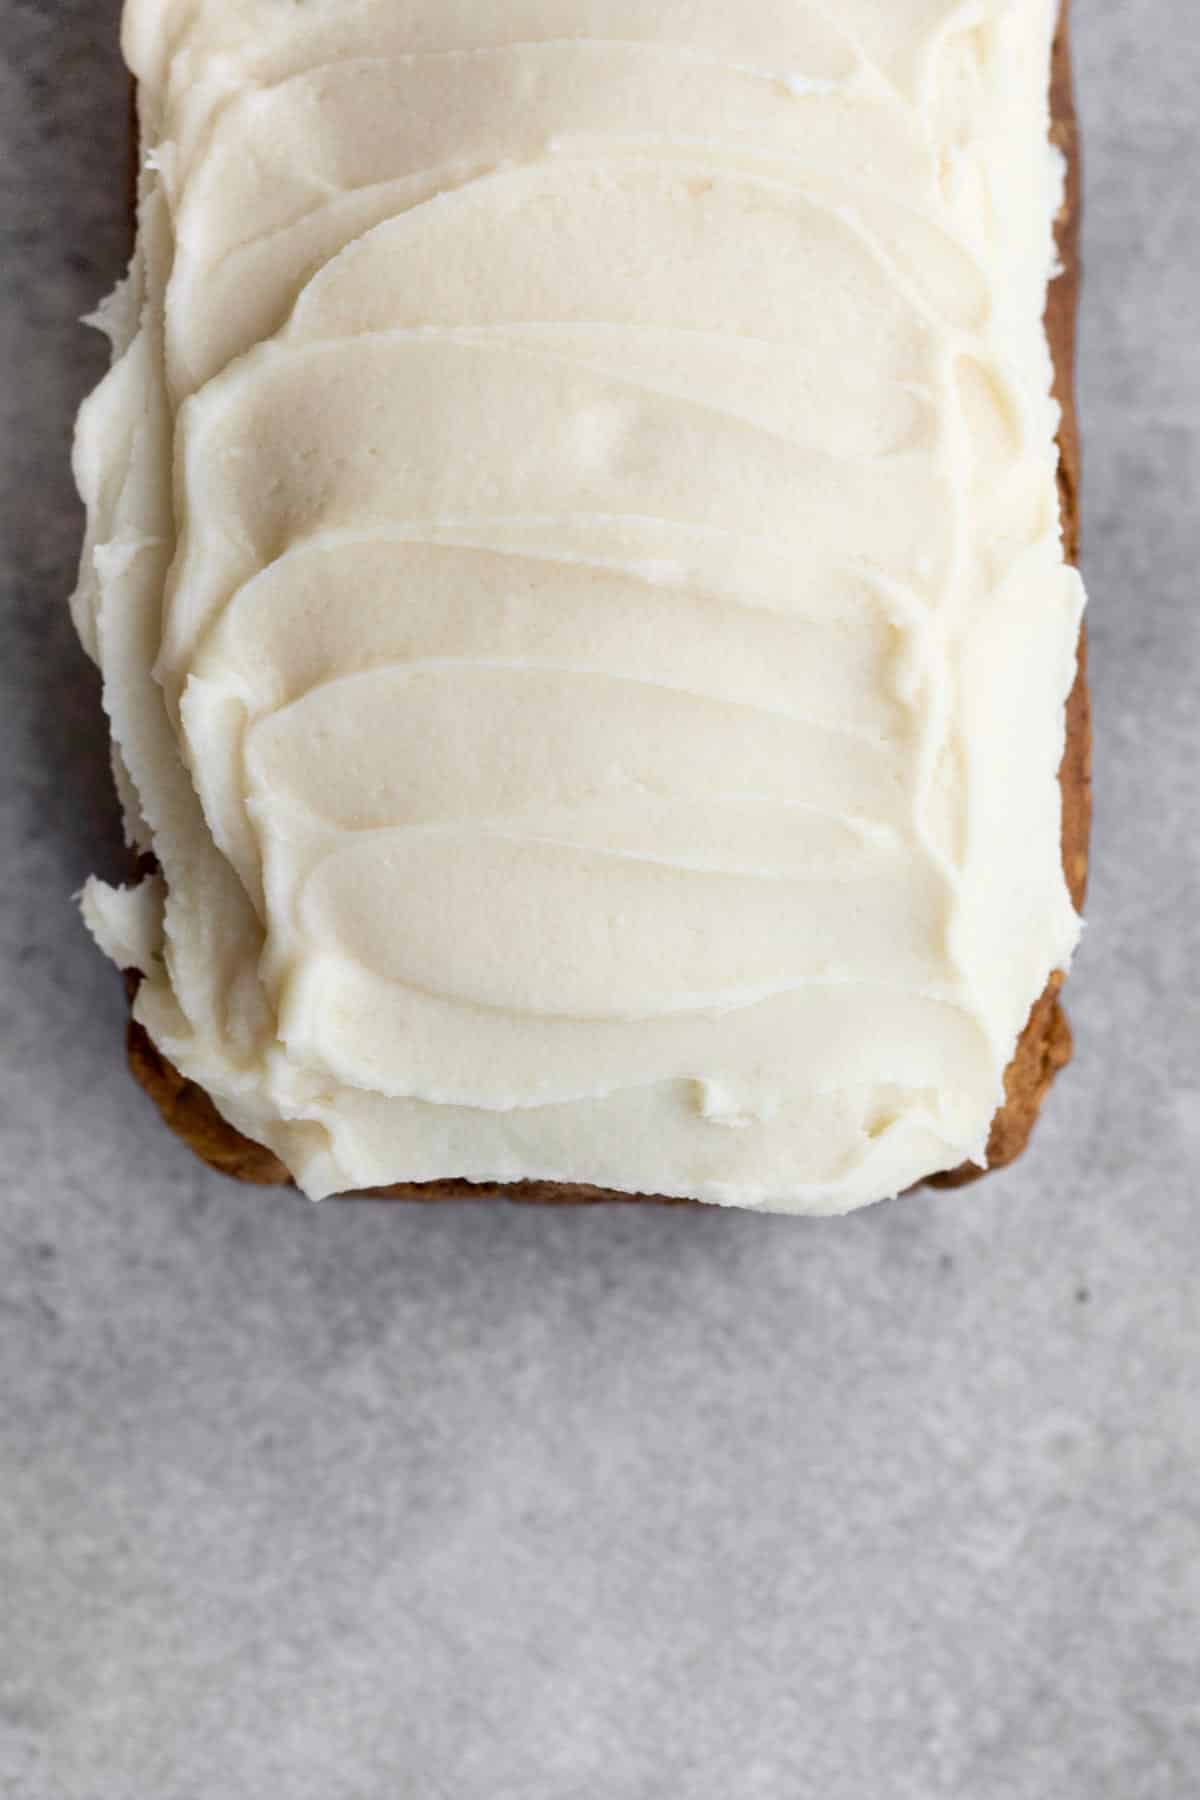 Frosting on top of the bread.